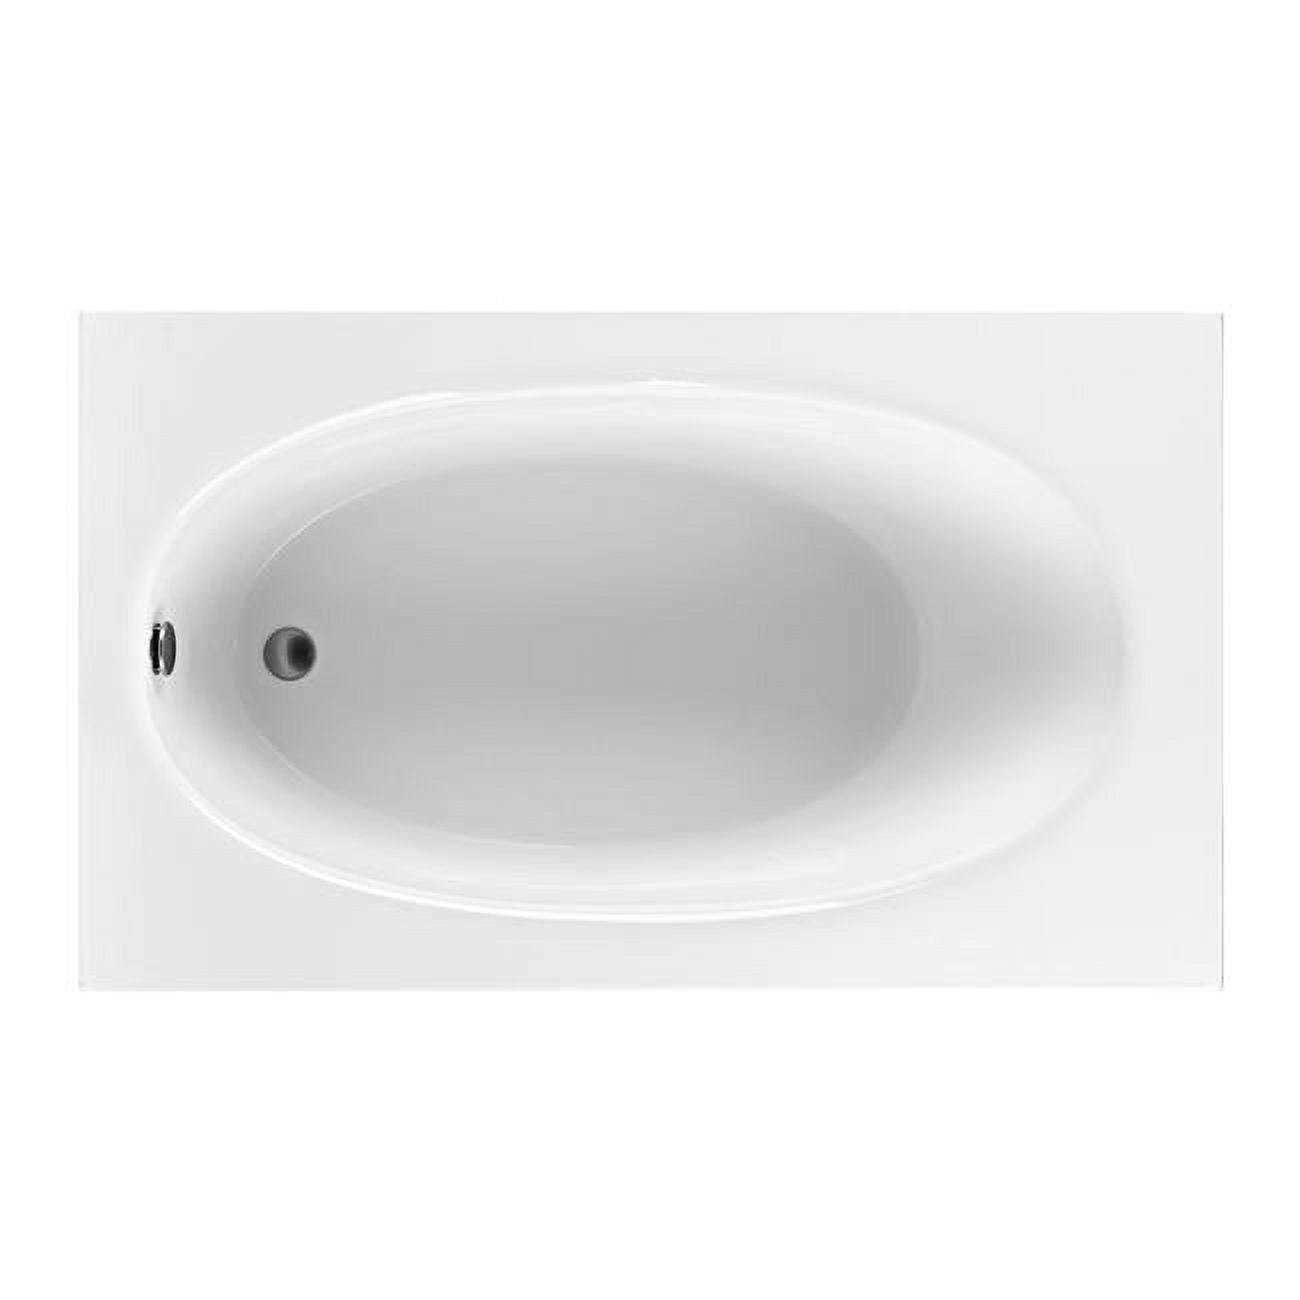 Rectangular End Drain Air Bath, Biscuit - 59.75 x 35.75 x 19.75 in. - image 1 of 1